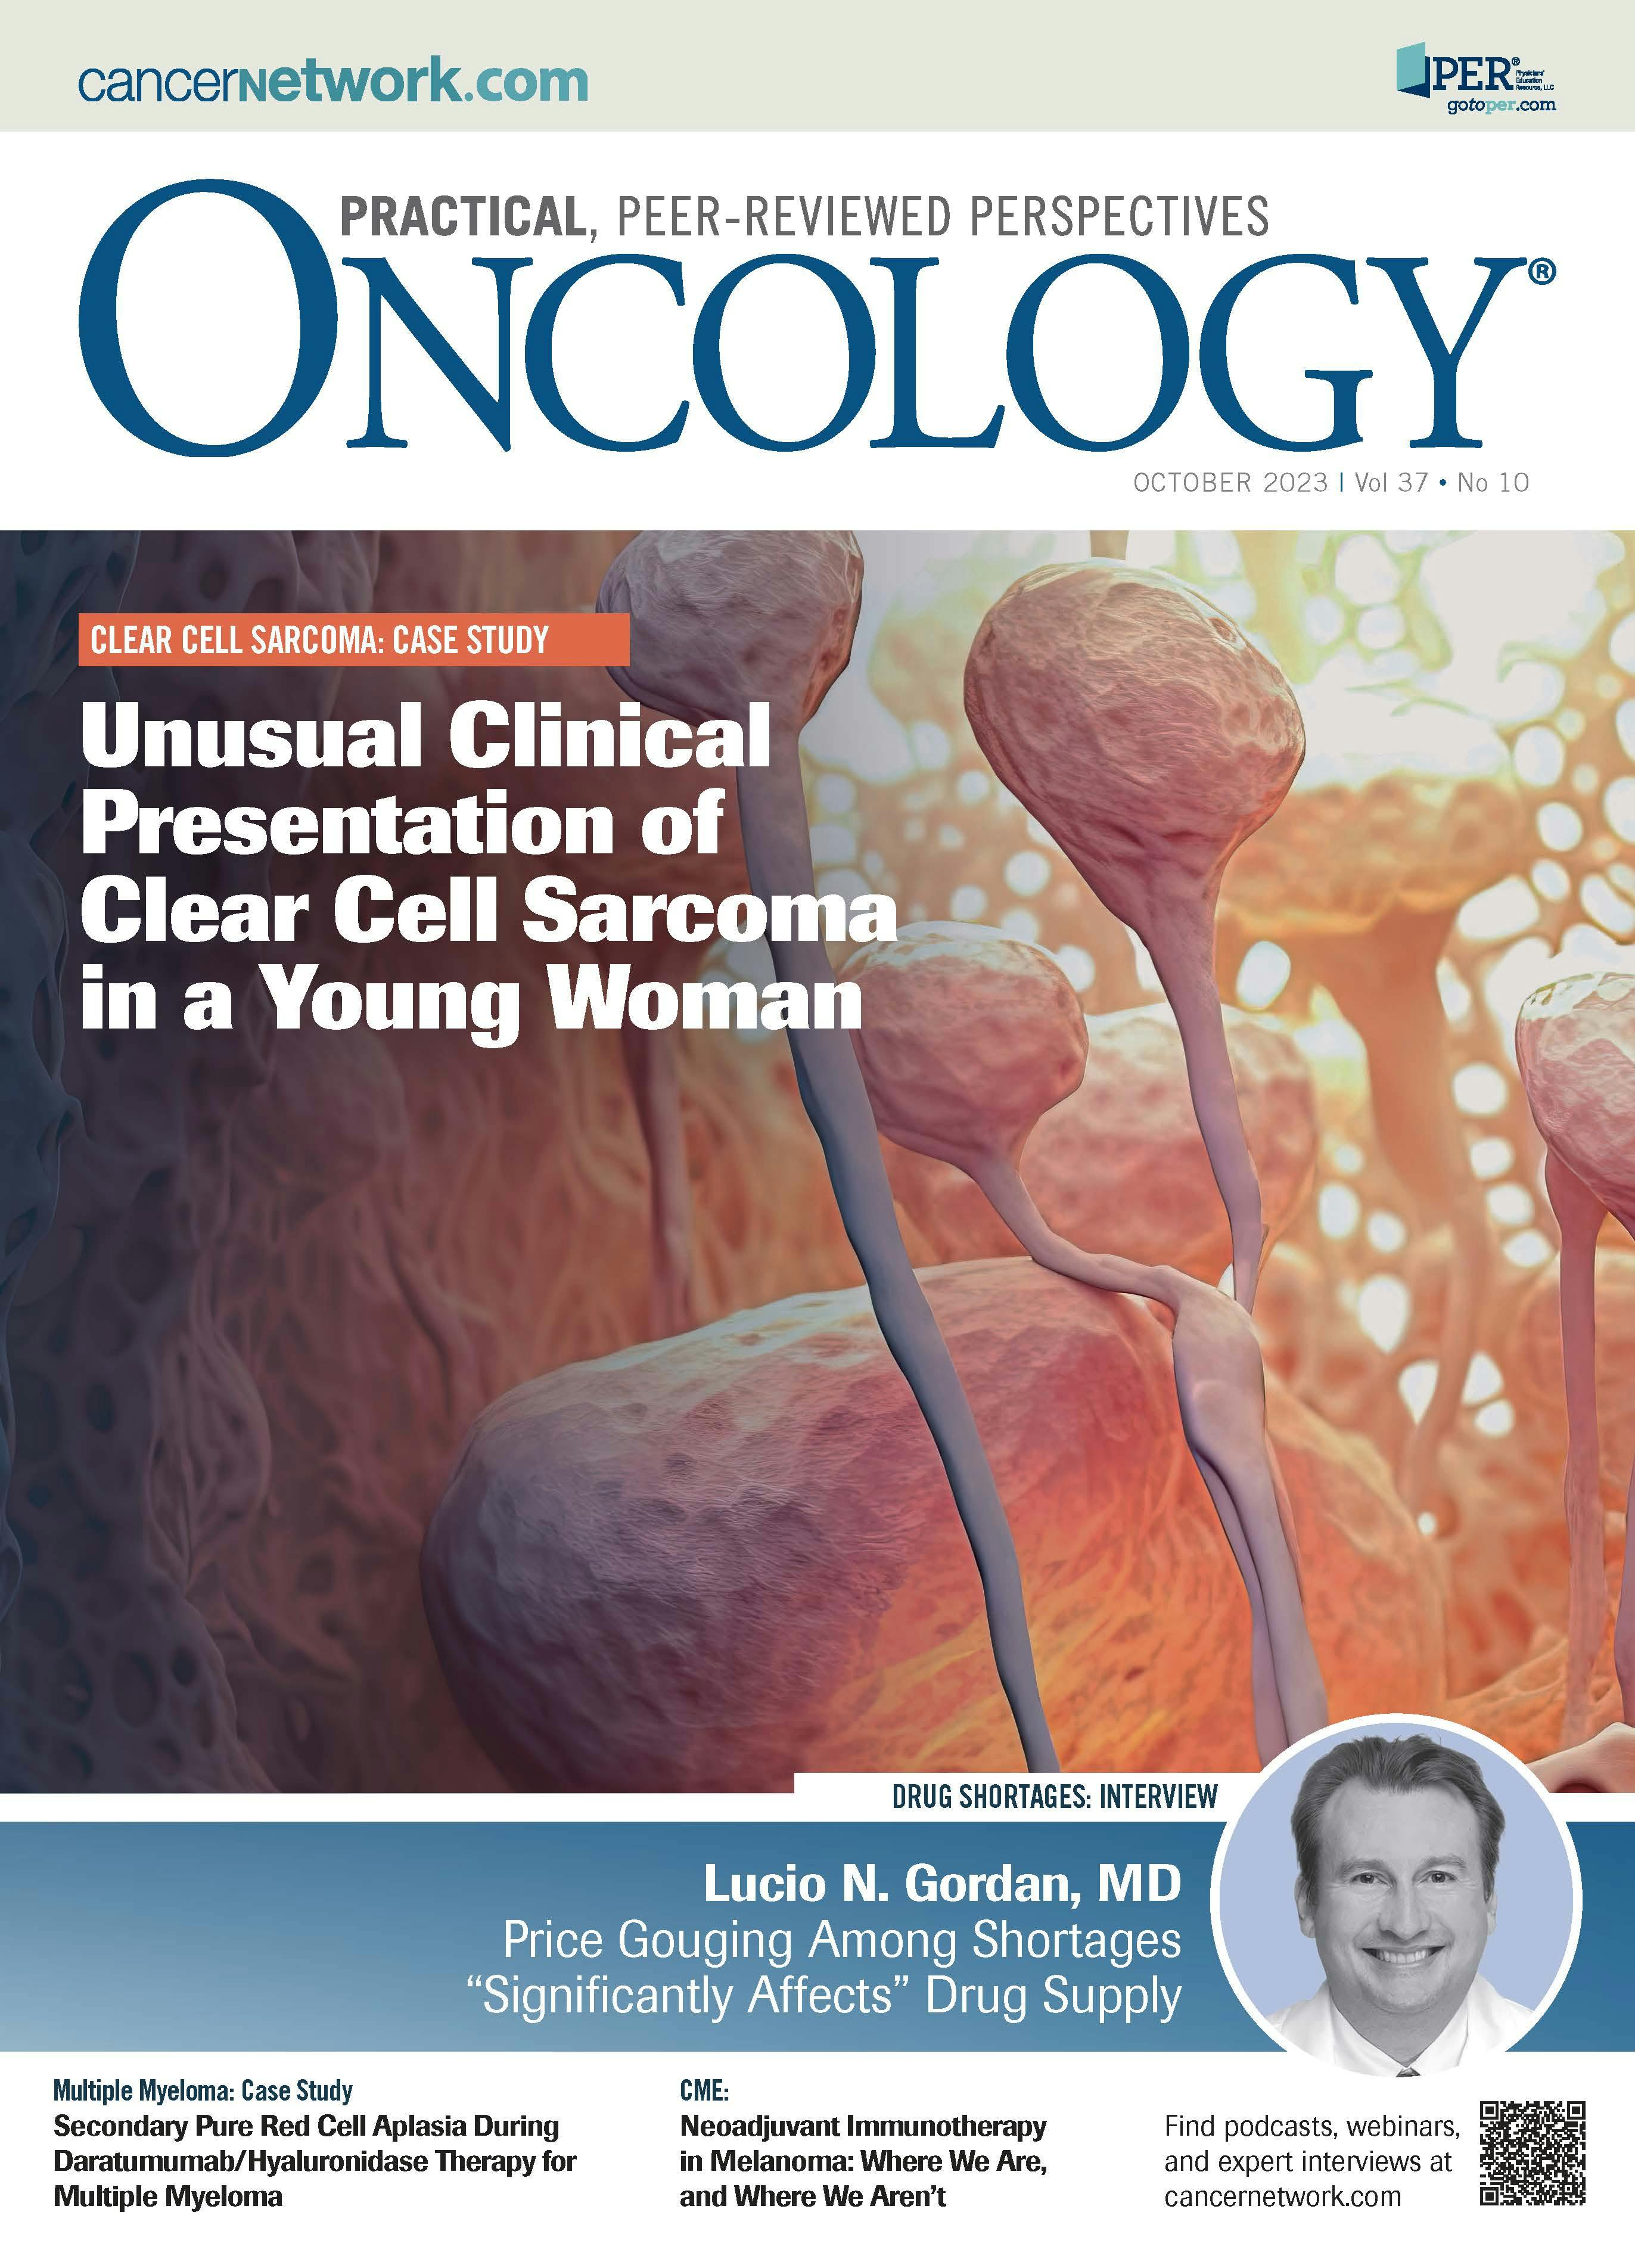 ONCOLOGY Vol 37, Issue 10